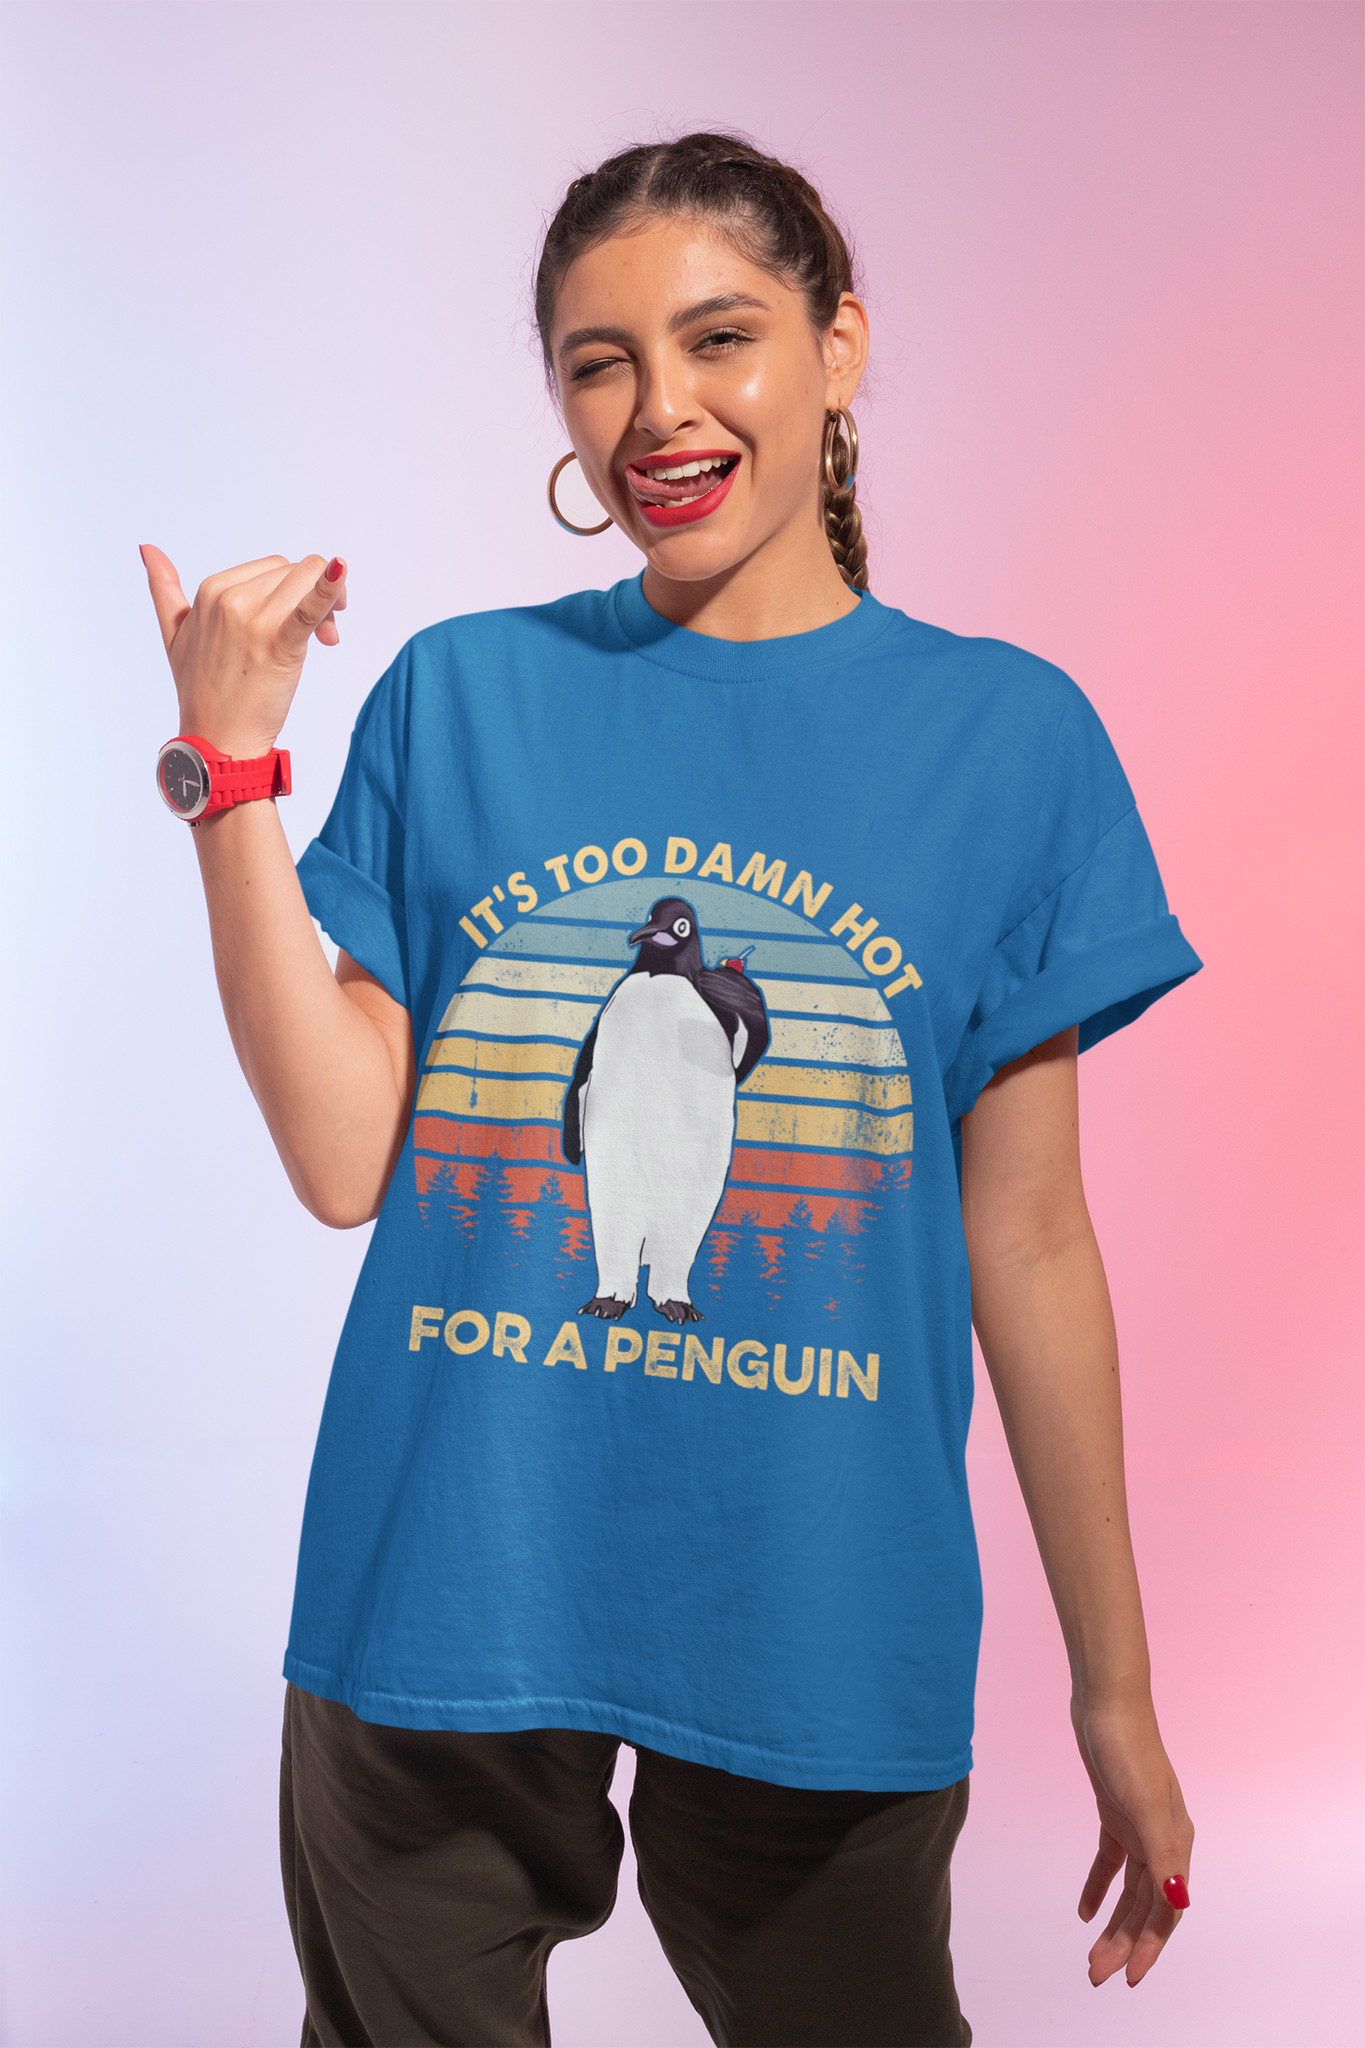 Billy Madison Comedy Film T Shirt, Its Too Damn Hot For A Penguin T Shirt